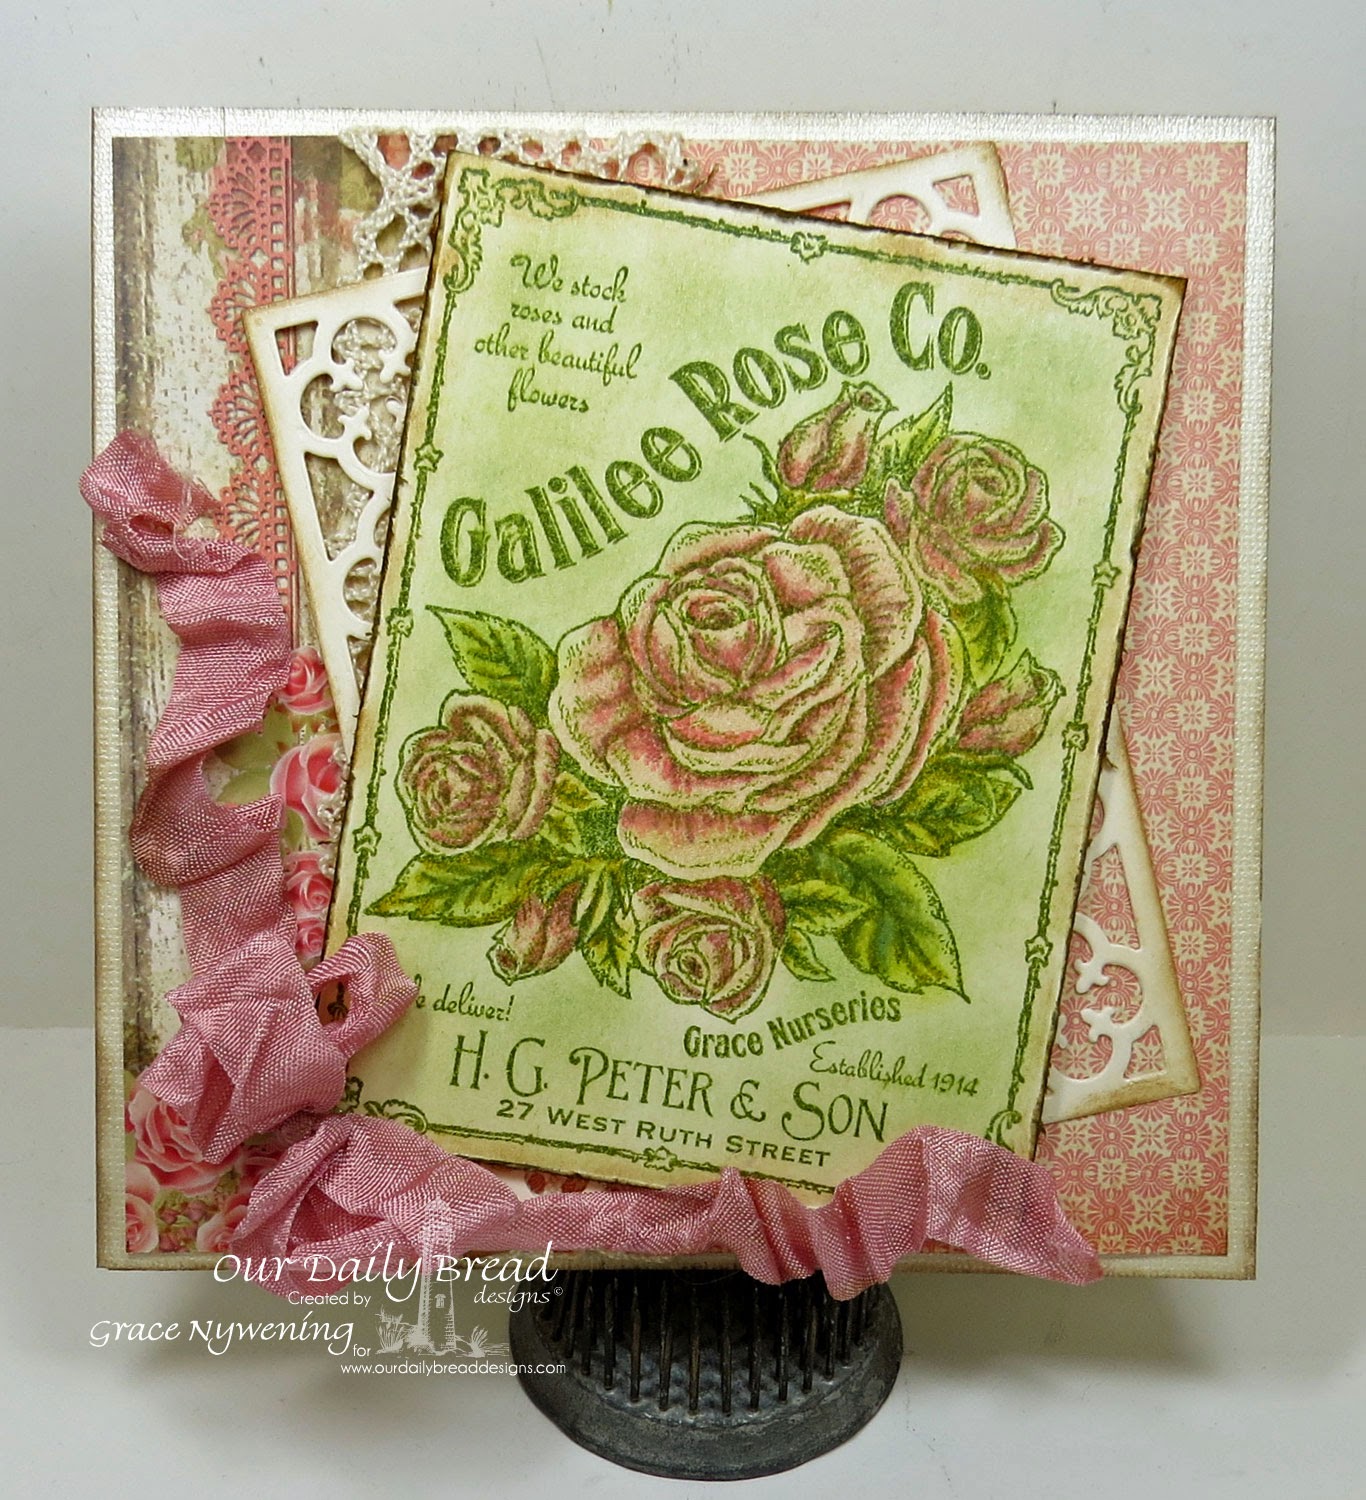 Our Daily Bread designs stamps, Galilee Rose, ODBD Blushing Rose Paper Collection, ODBD Quatrefoil Die, deisnged by Grace Nywening